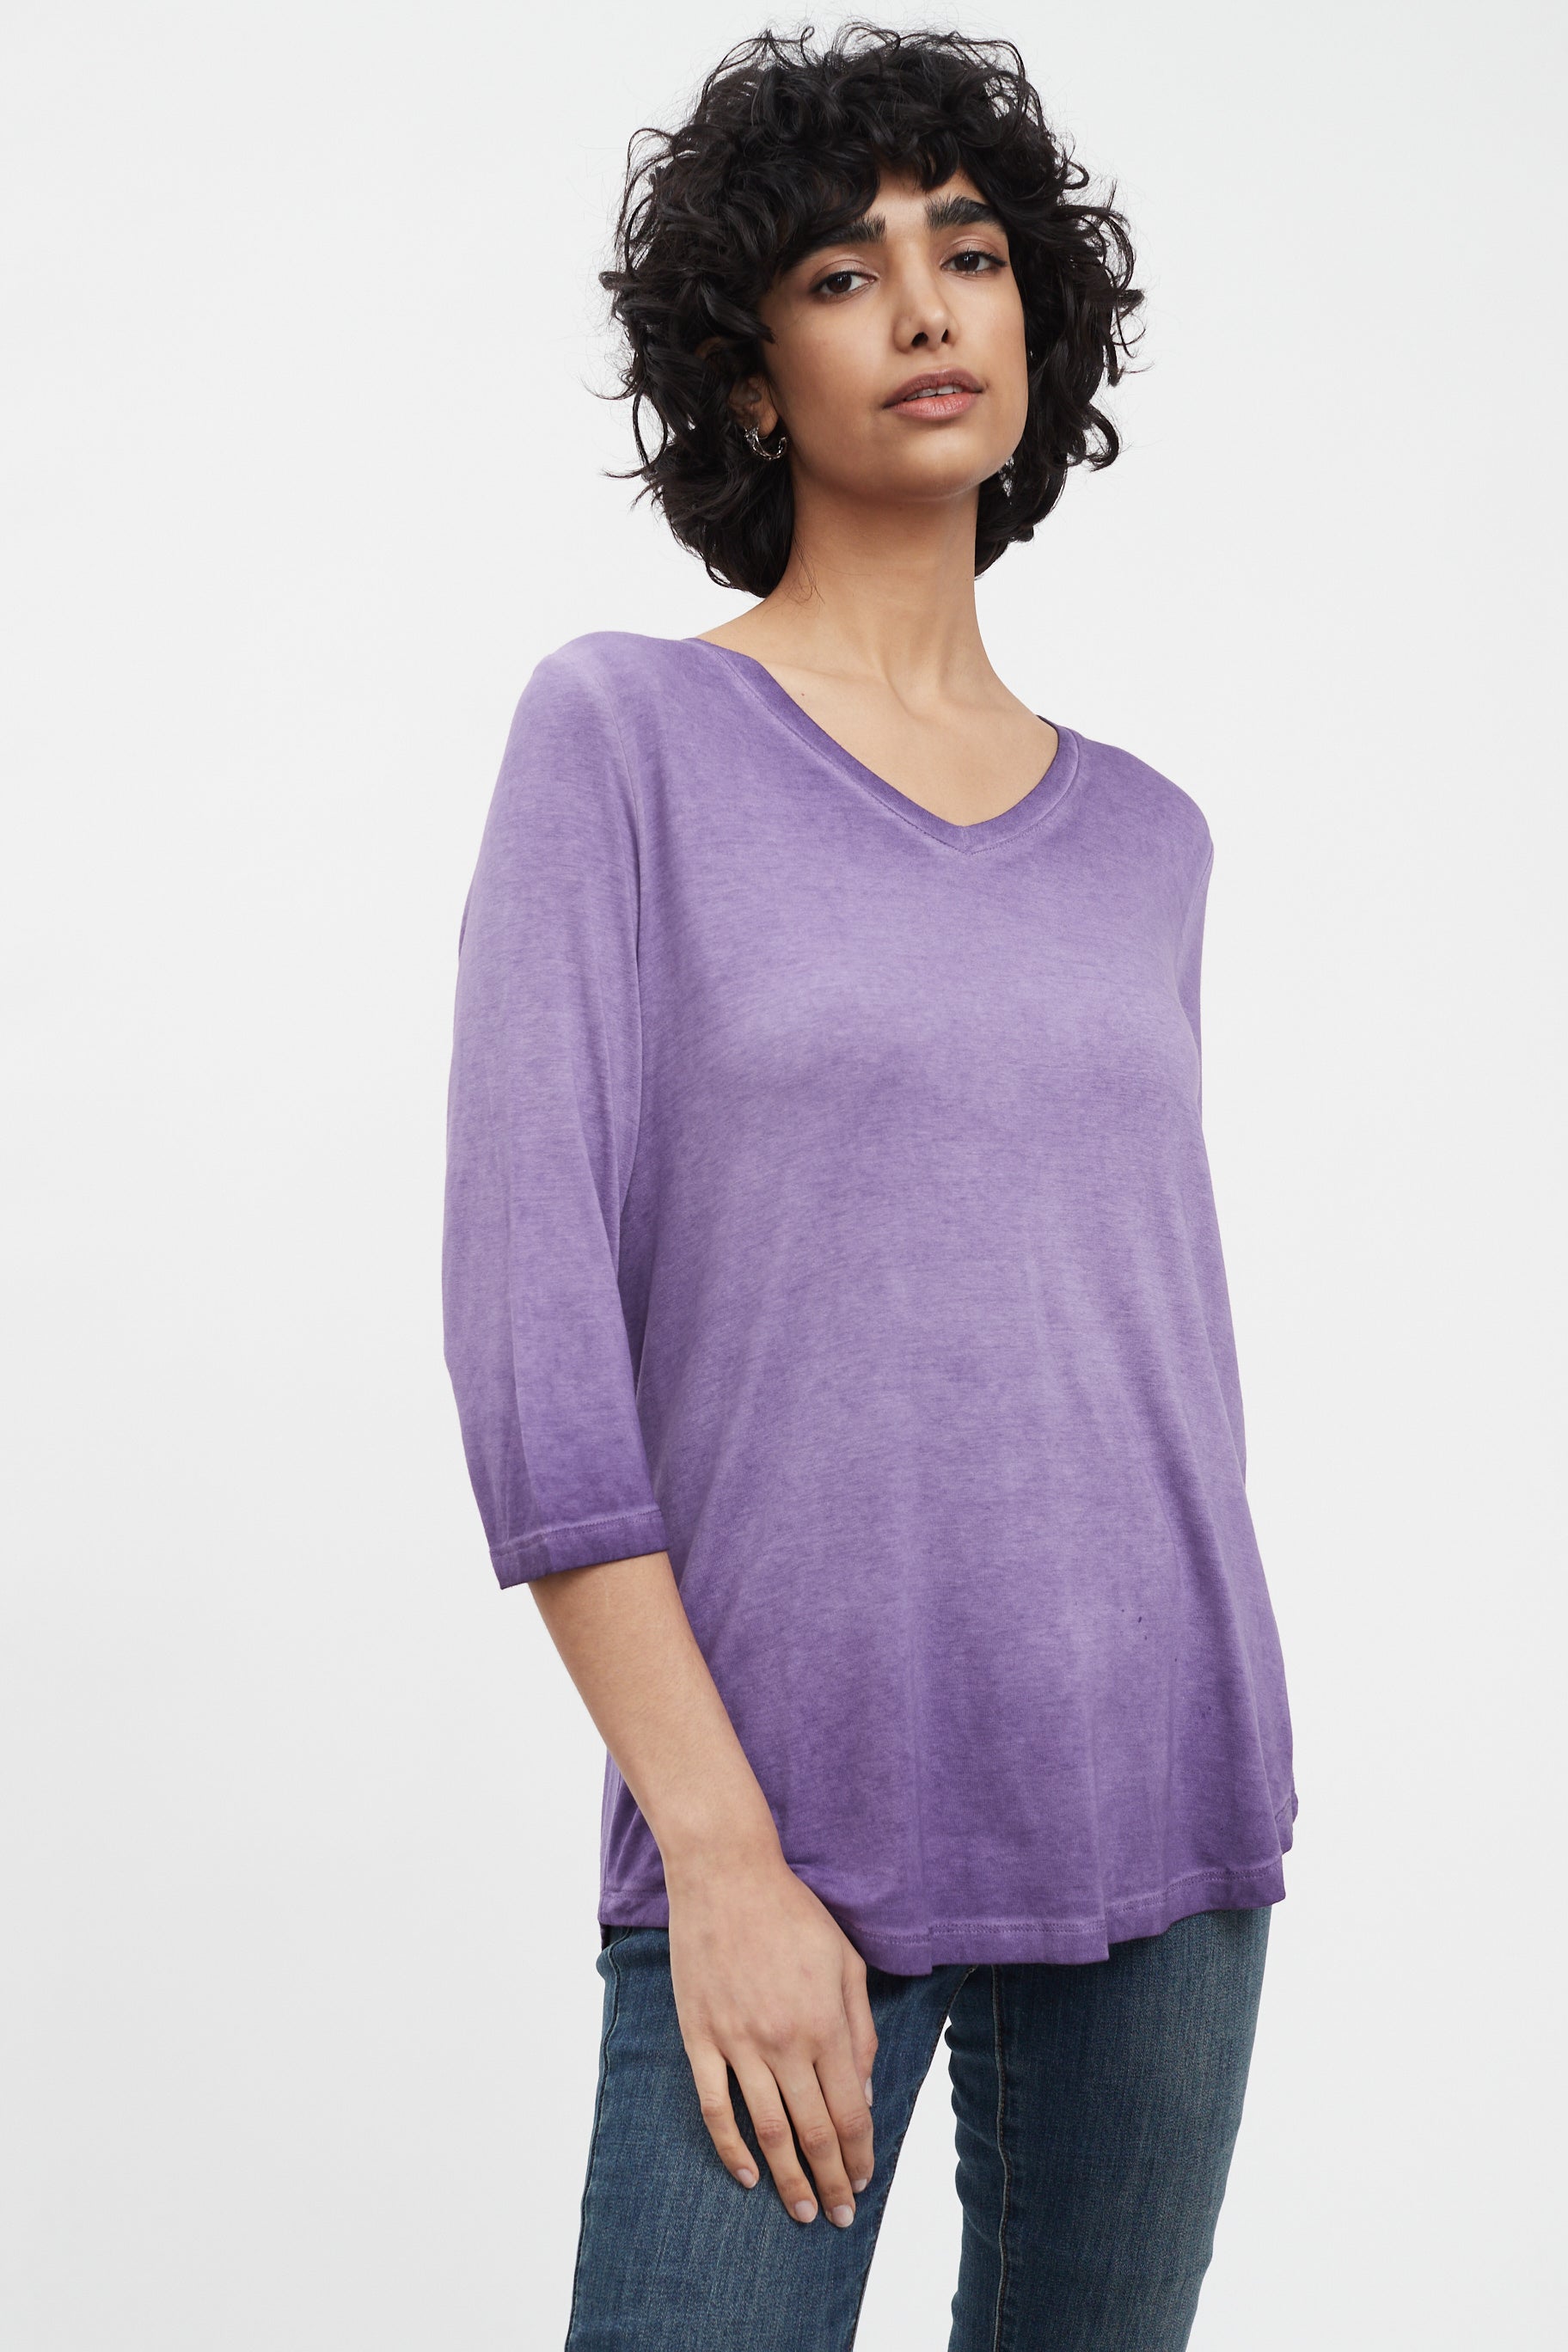 Garment Dyed Top 1521756